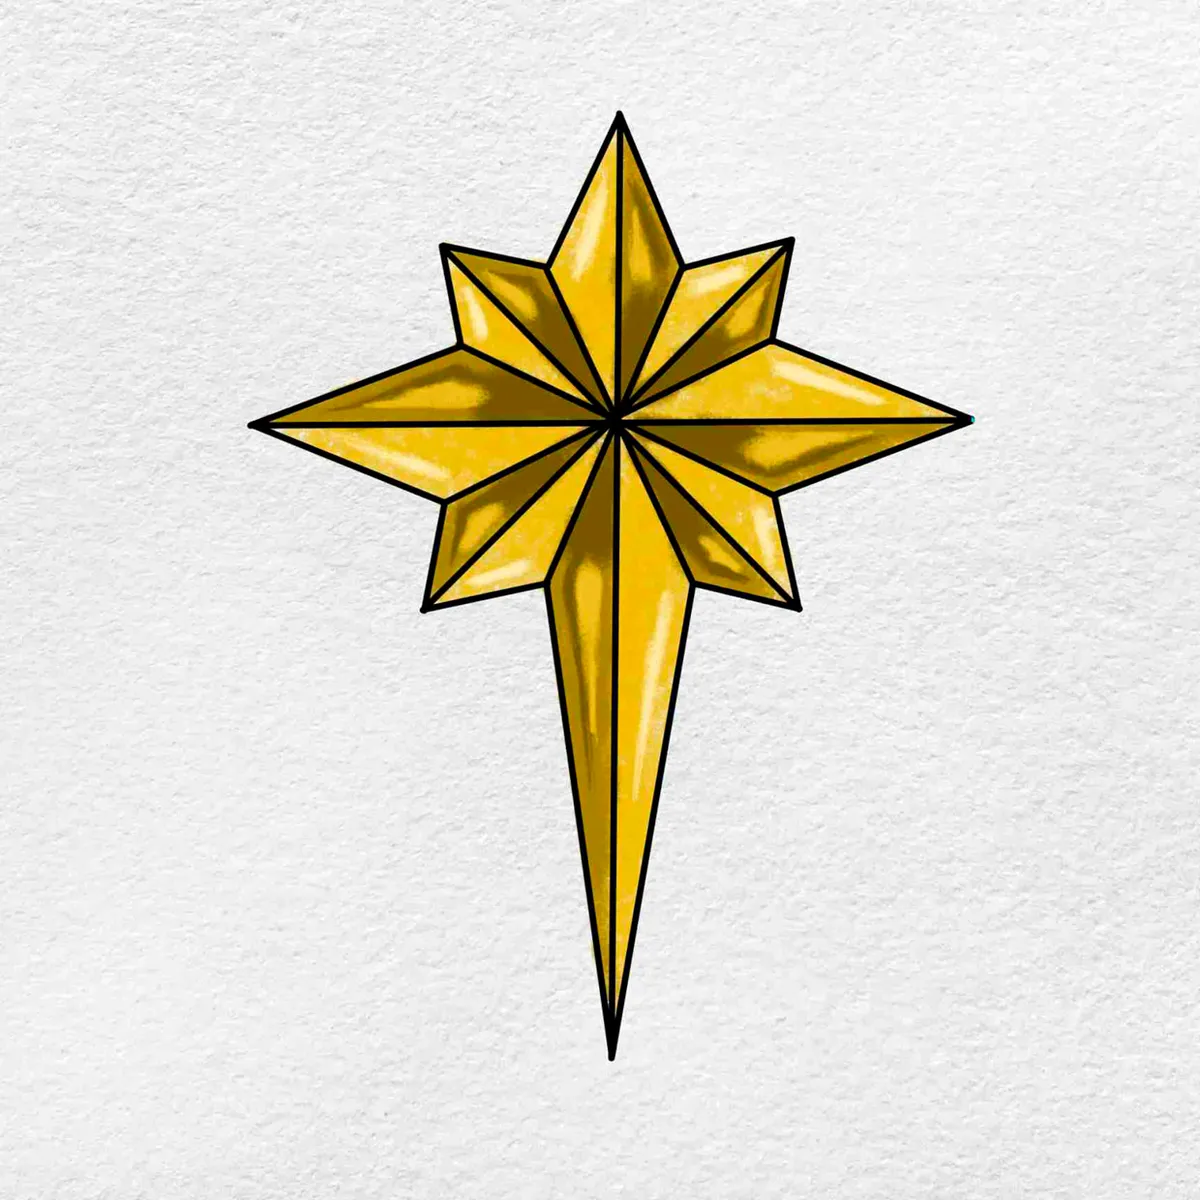 How to draw a Christmas star